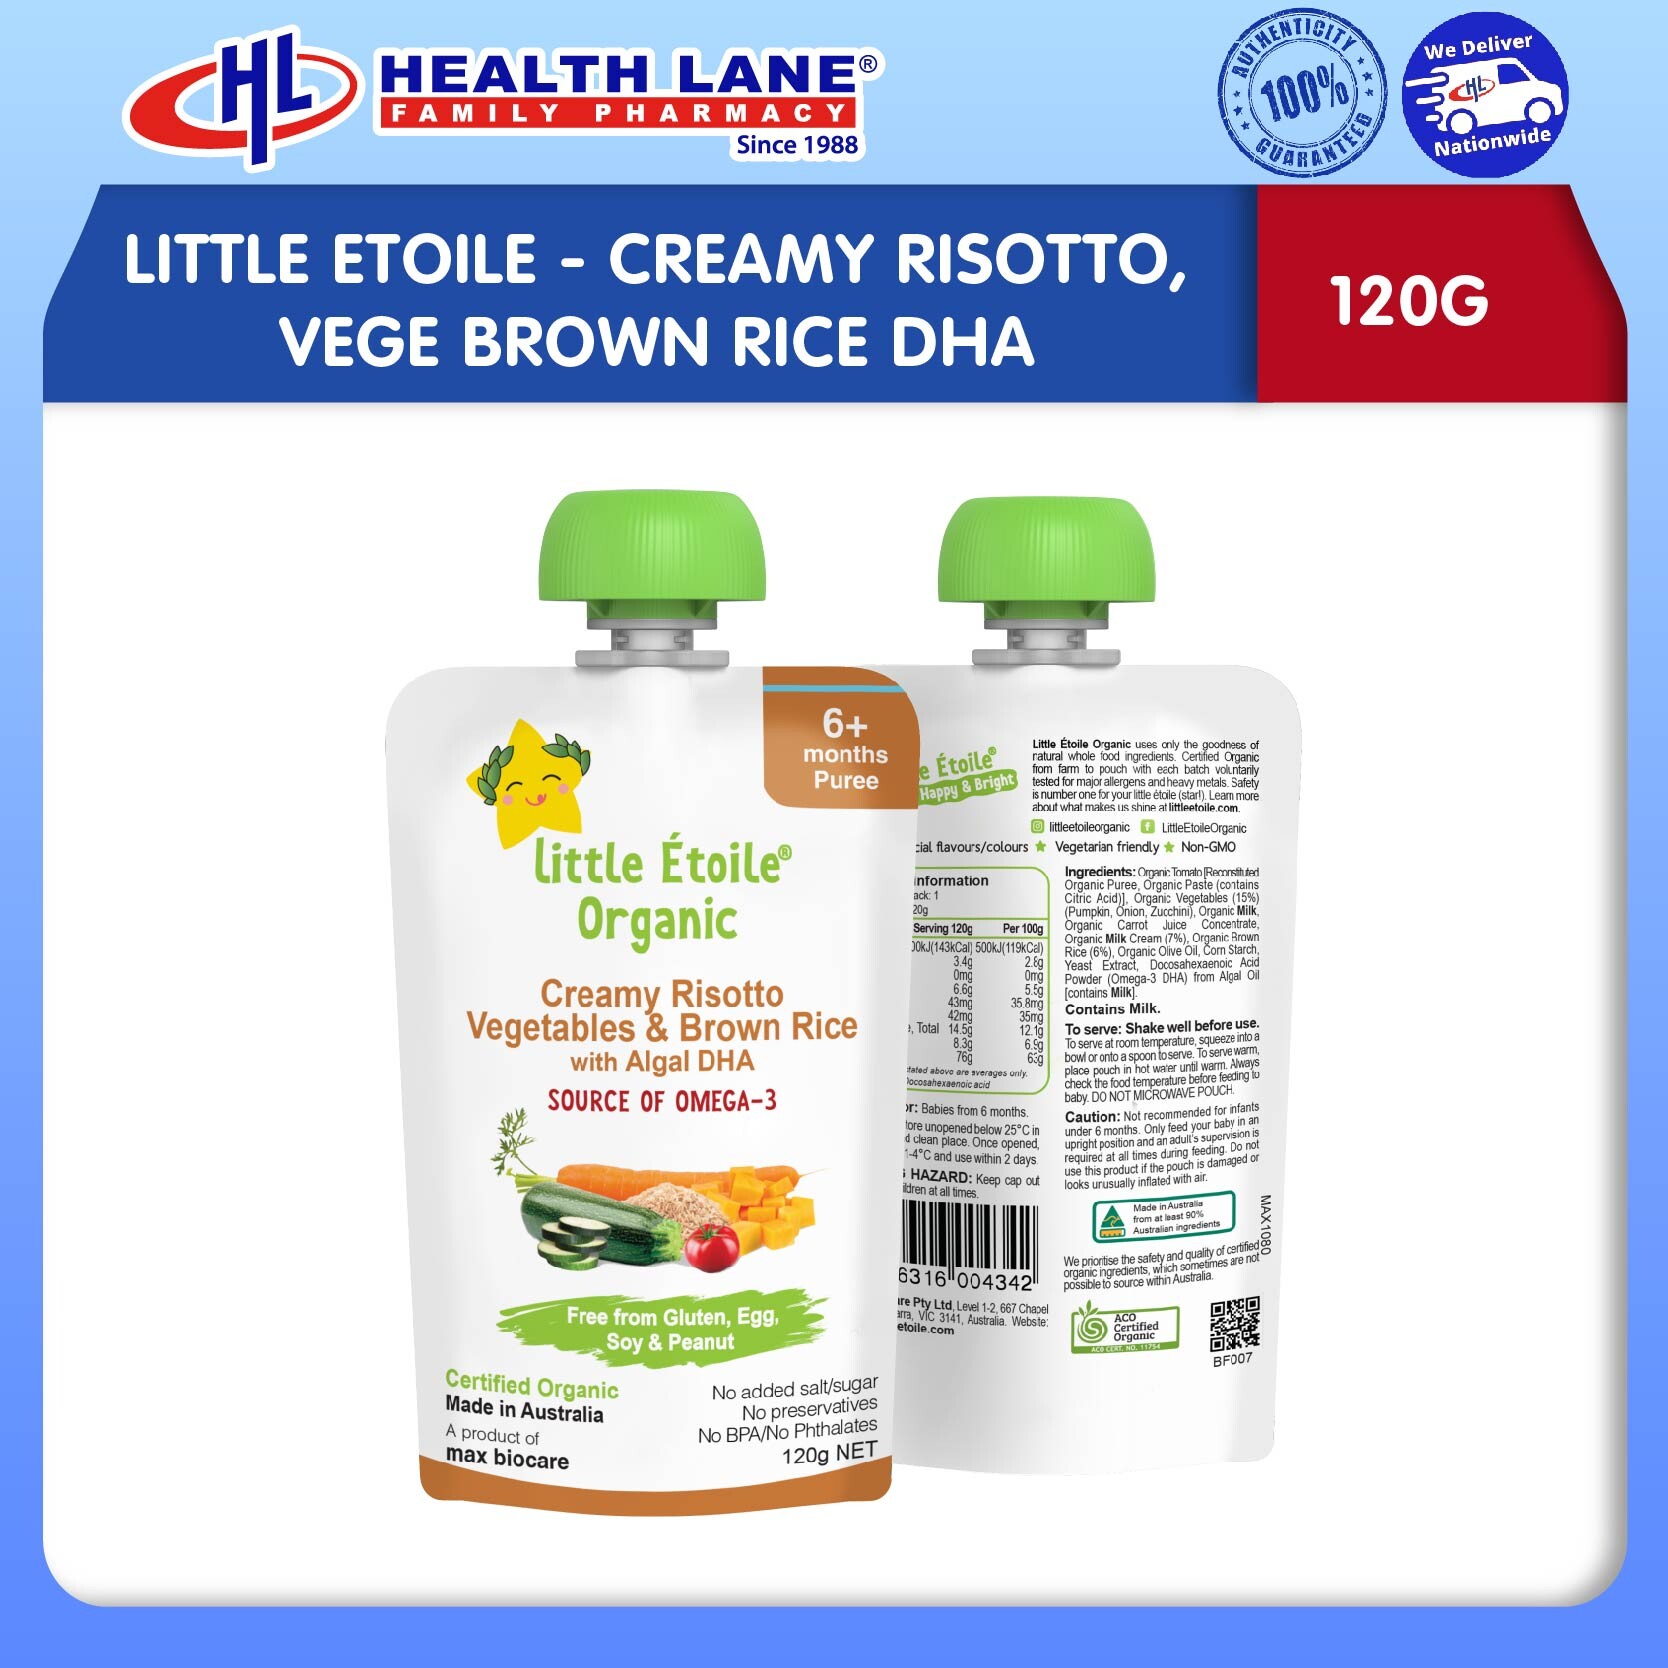 LITTLE ETOILE - CREAMY RISOTTO, VEGE BROWN RICE DHA (120G)